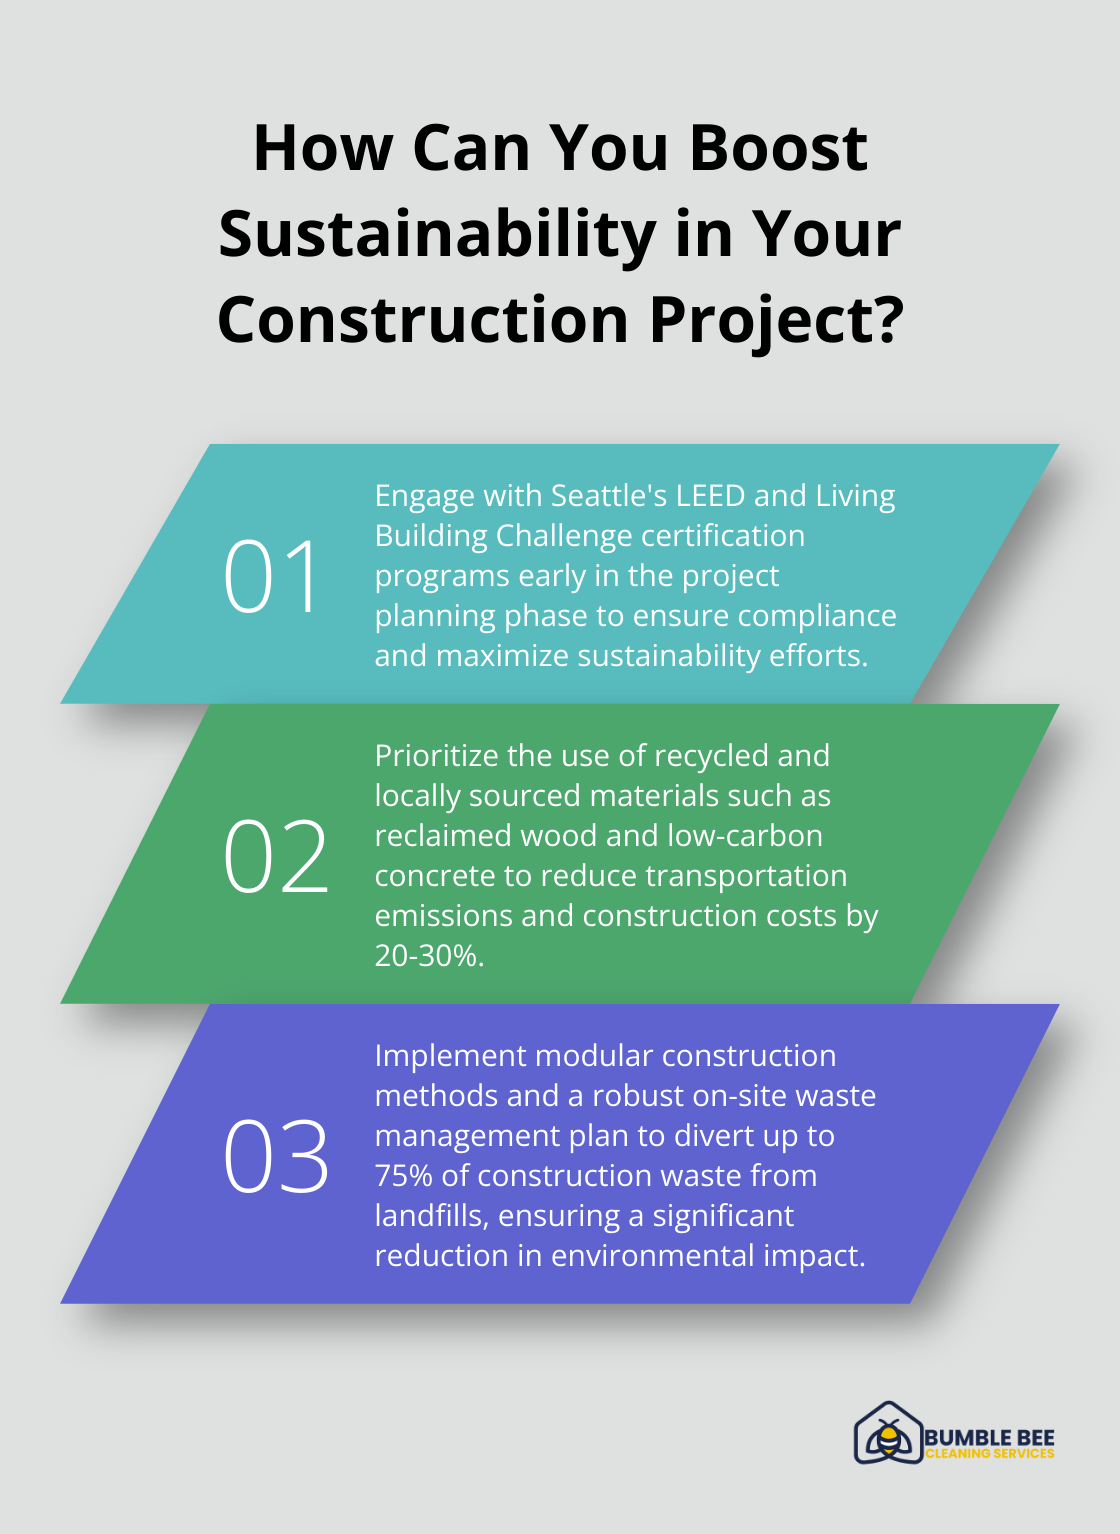 Fact - How Can You Boost Sustainability in Your Construction Project?